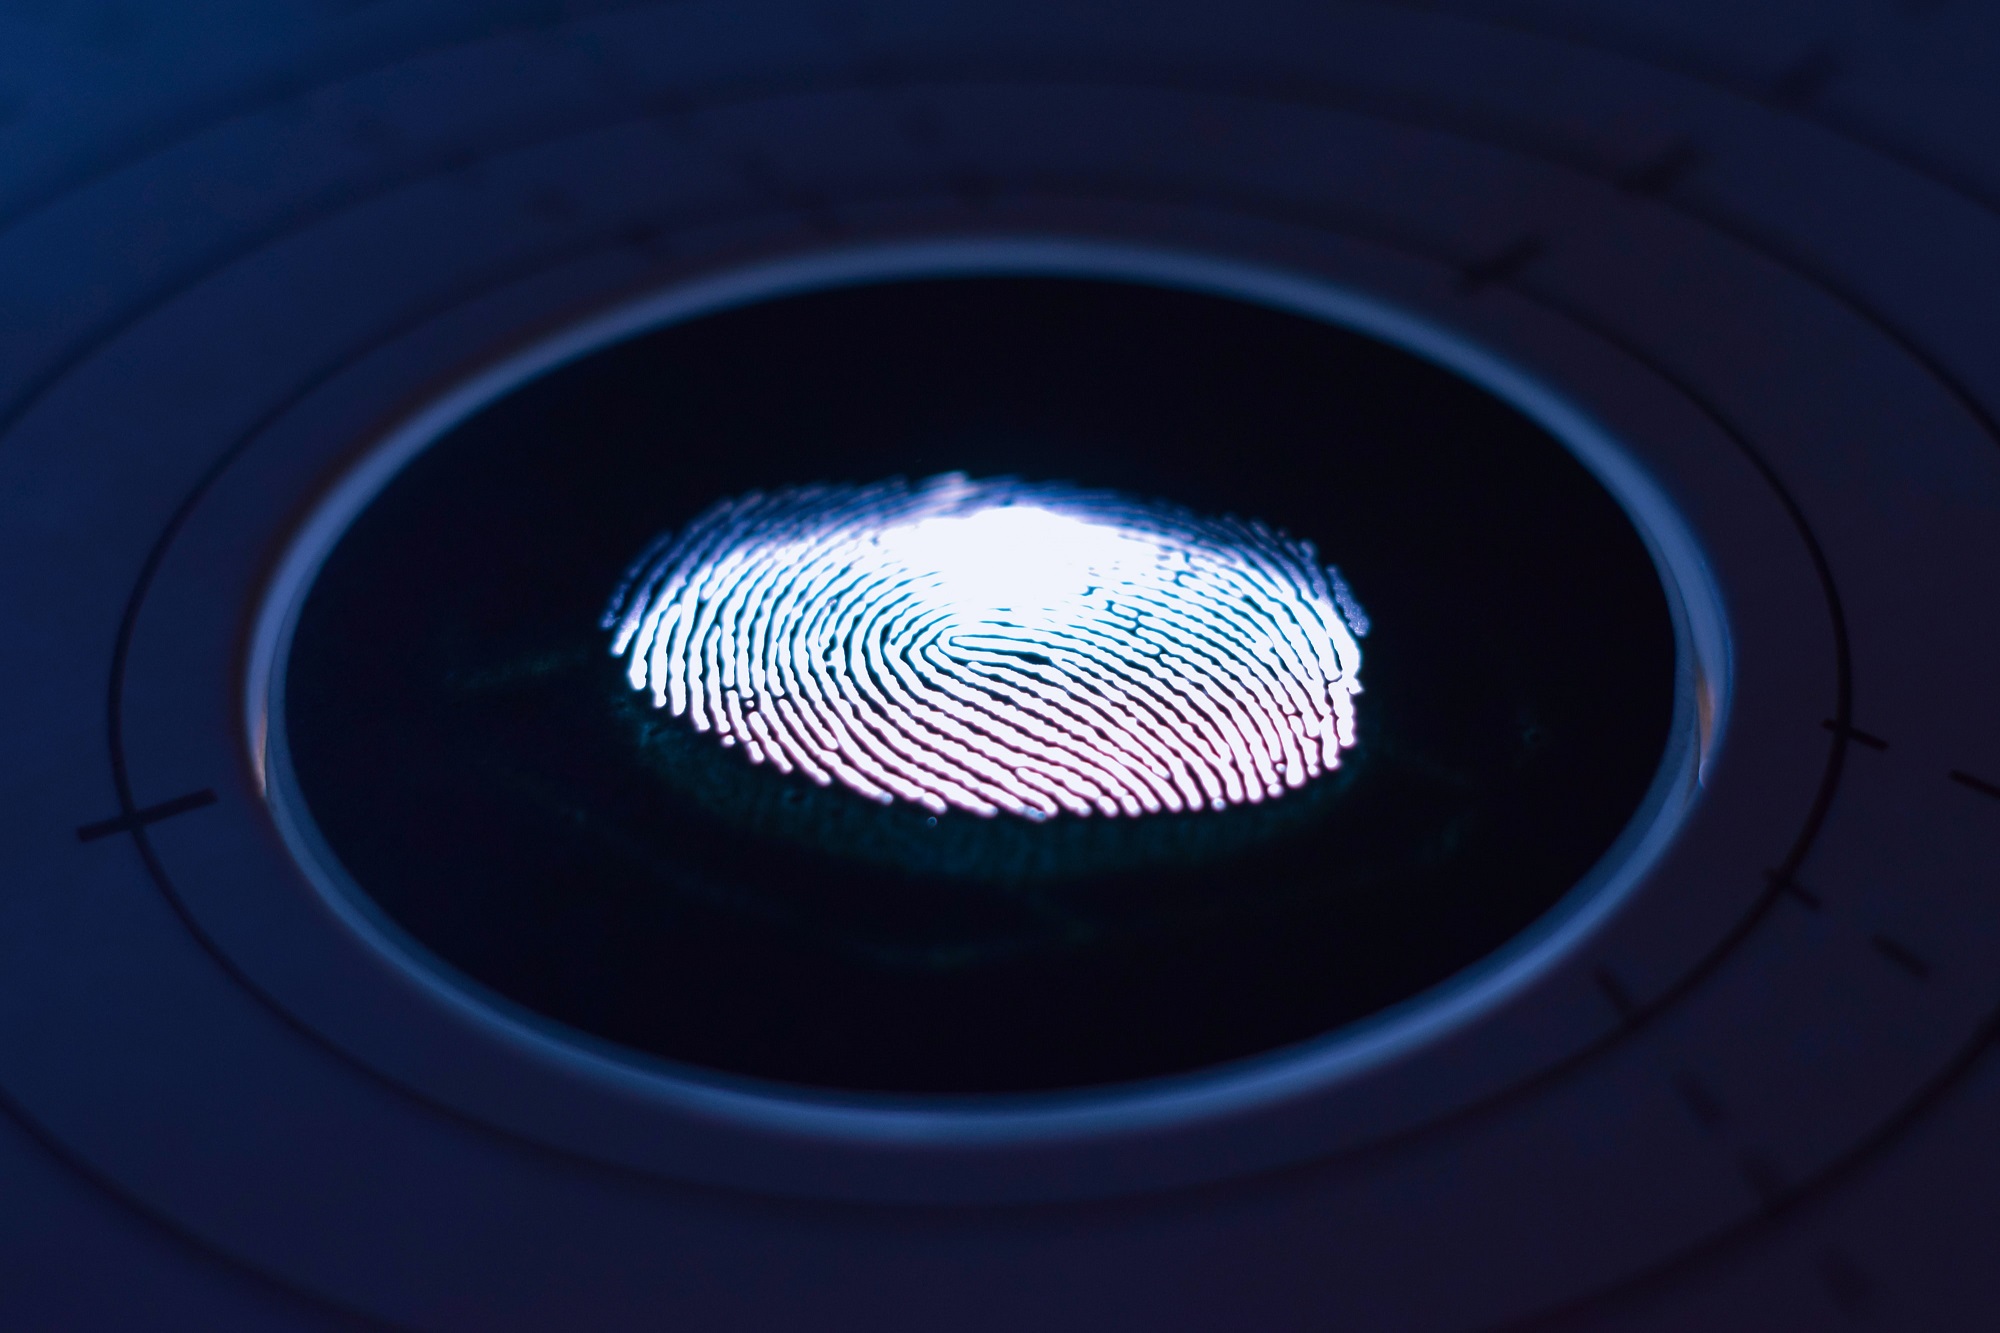 Fingerprints cannot be used for recording working hours, German court says